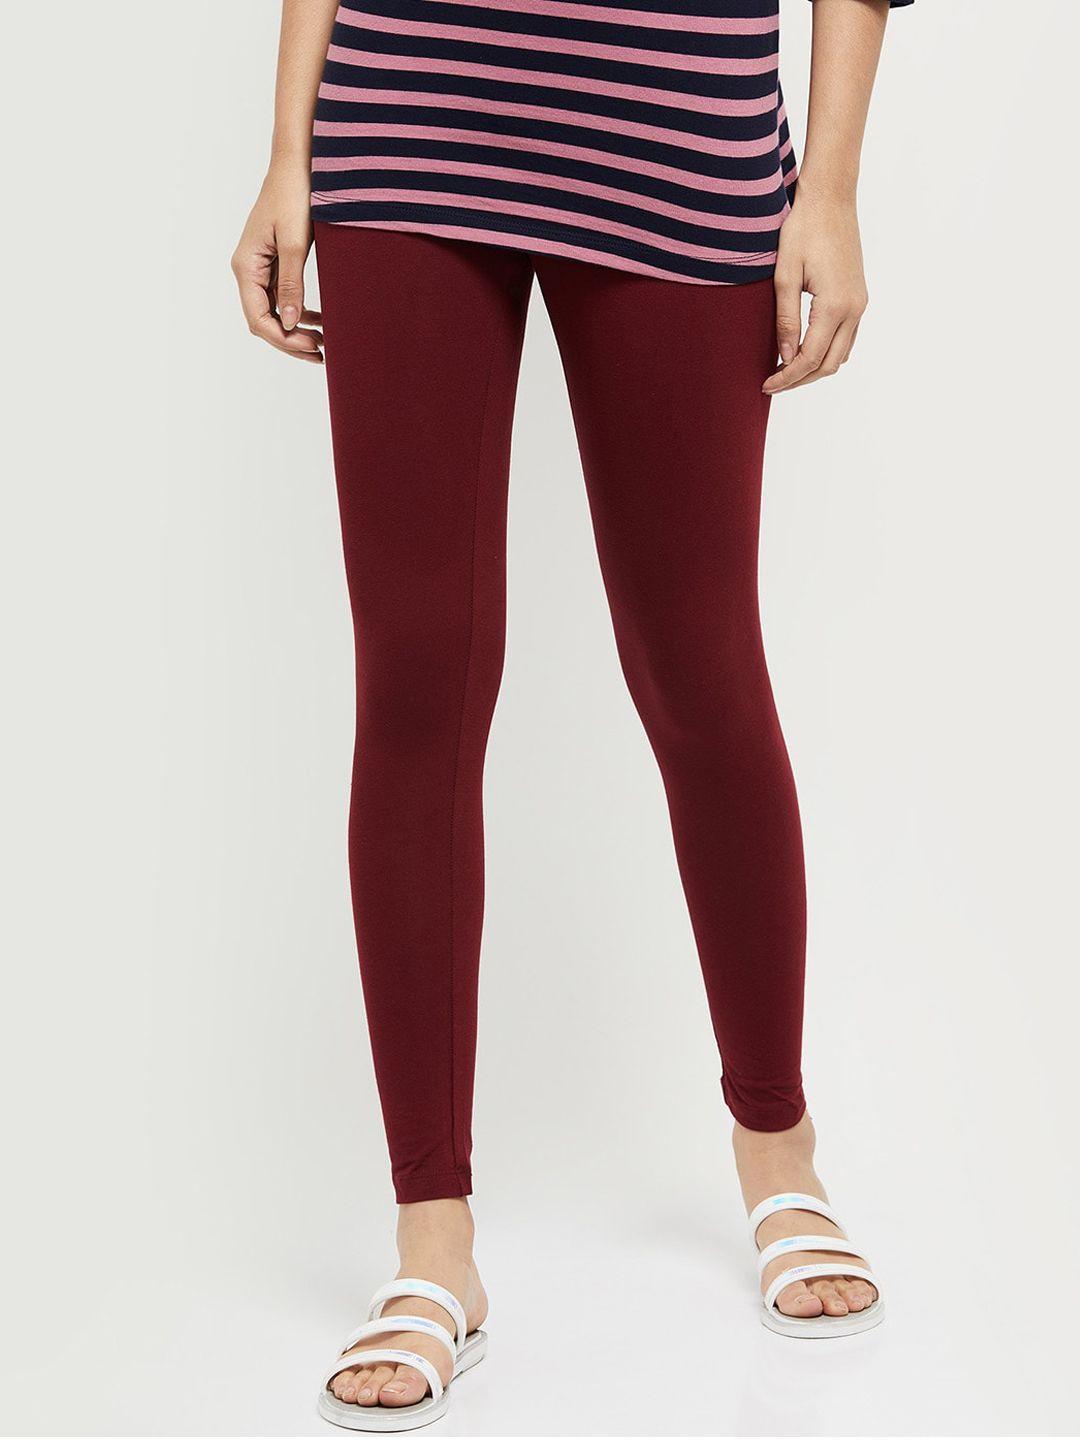 max women maroon solid ankle-length cotton leggings